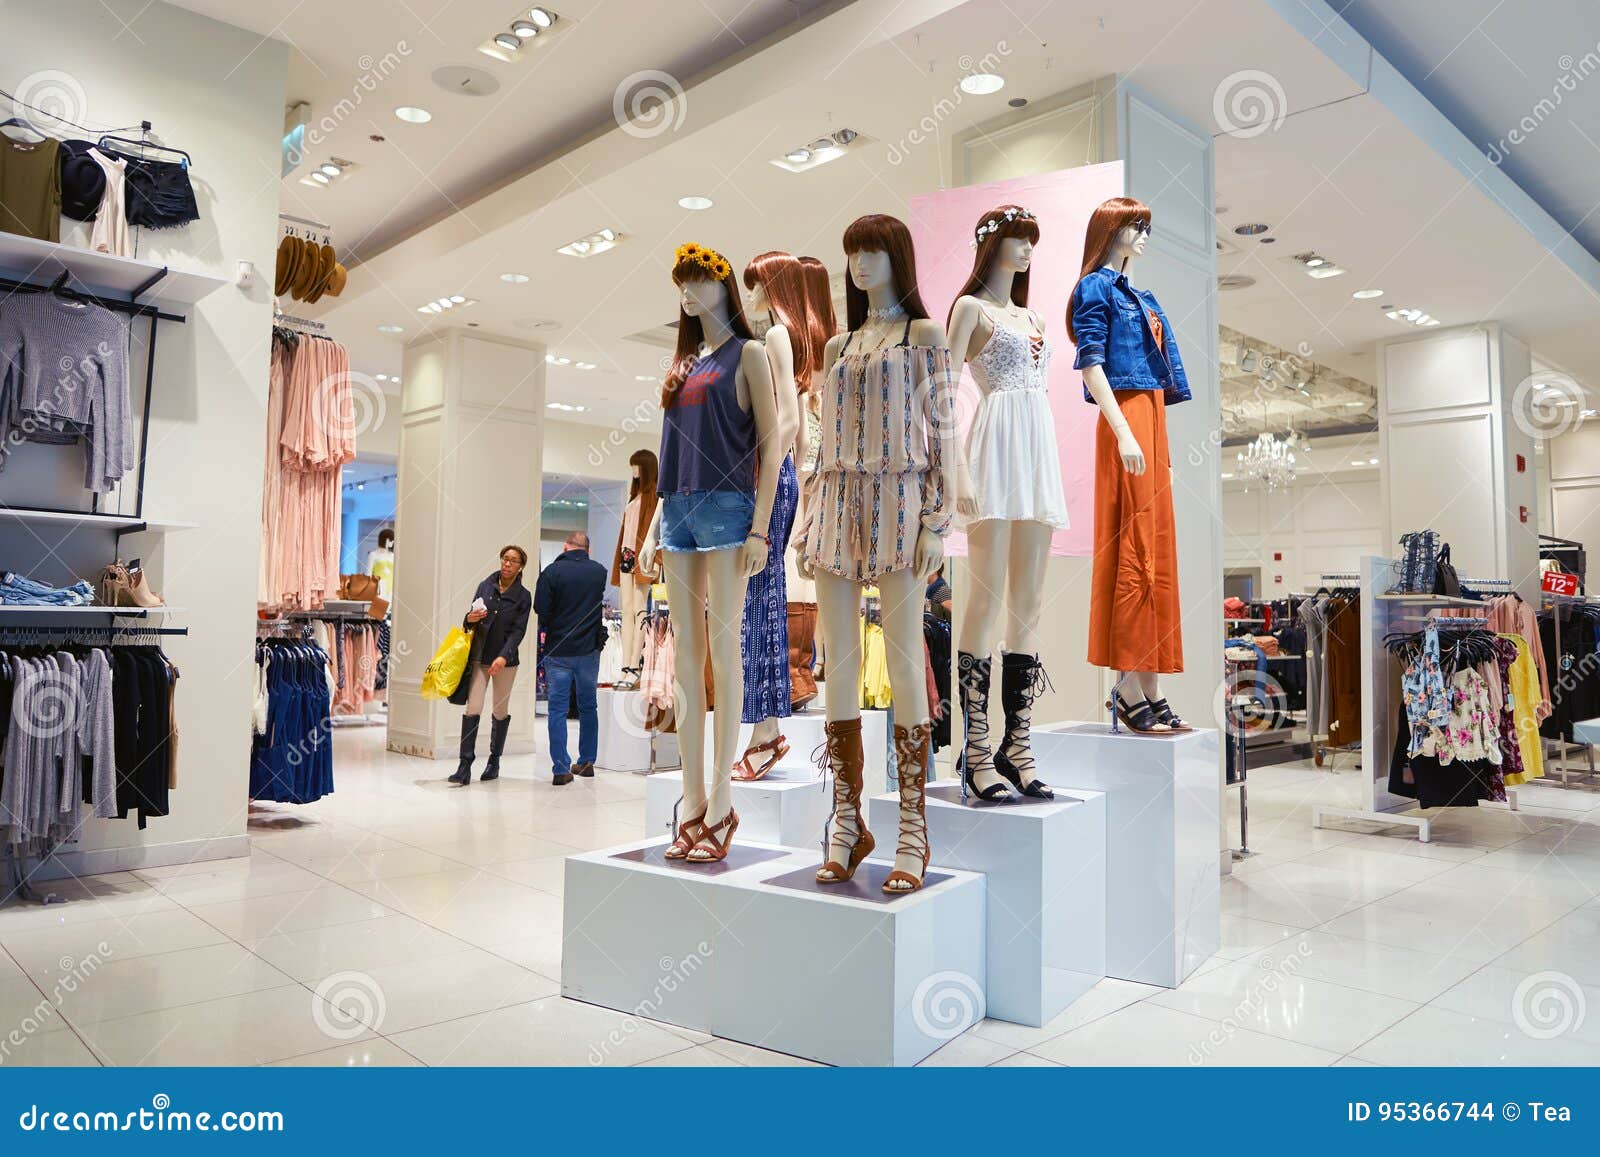 Forever 21 store editorial stock image. Image of apparel - 95366744